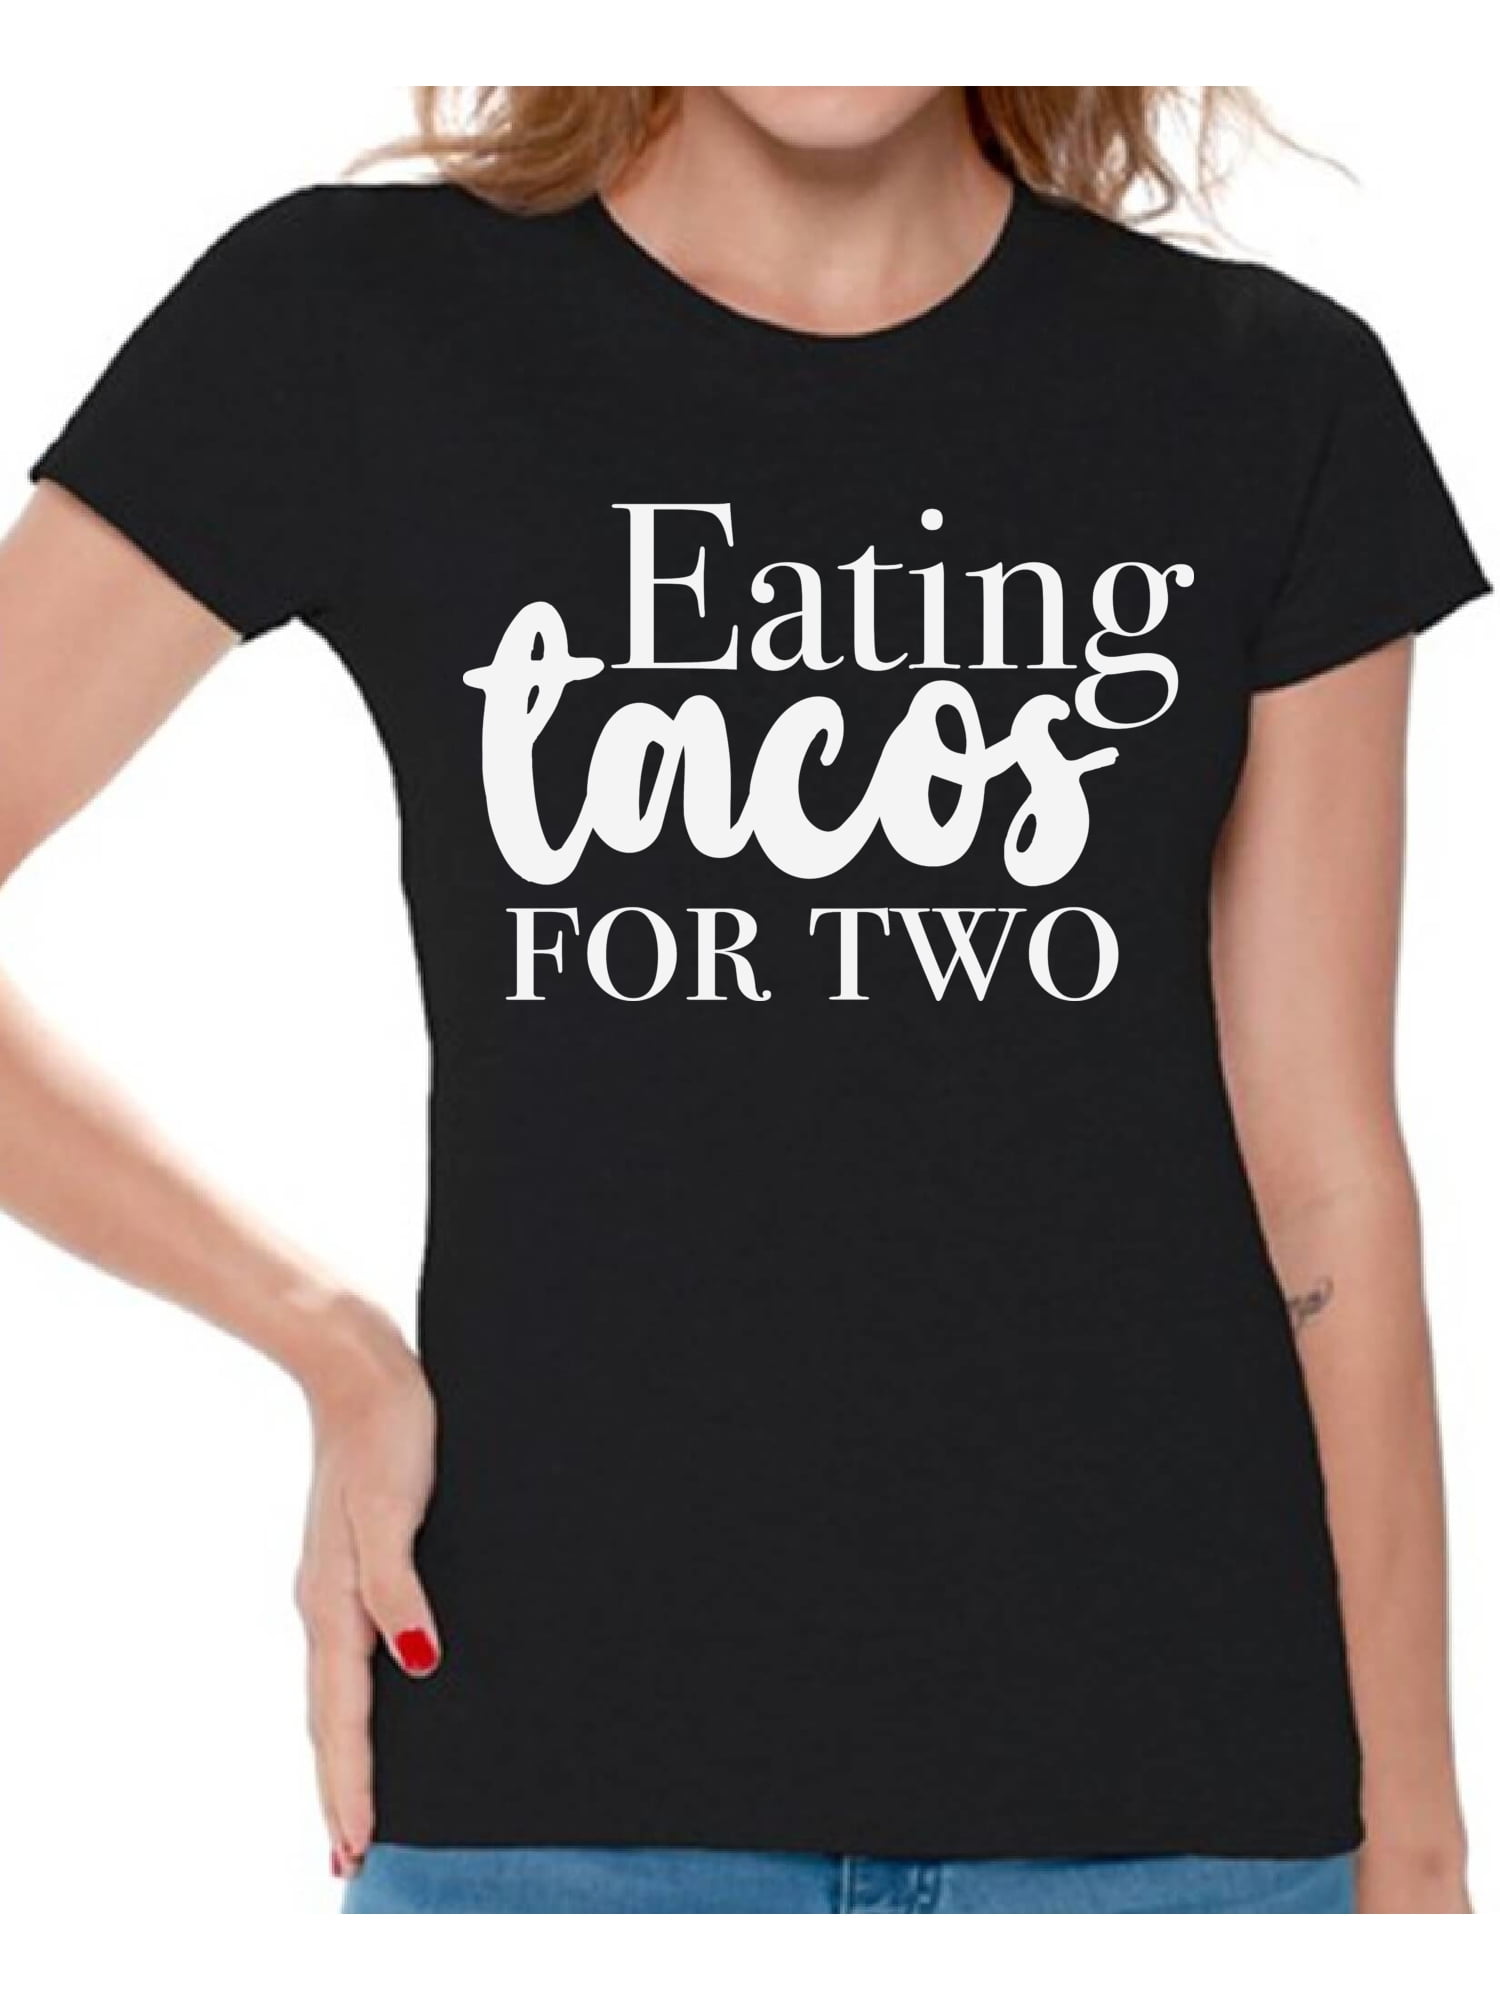 My Baby Love Tacos Maternity T Shirts Casual Loose Pregnancy Top Women O Neck Short Sleeve Casual Pregnant Blouse